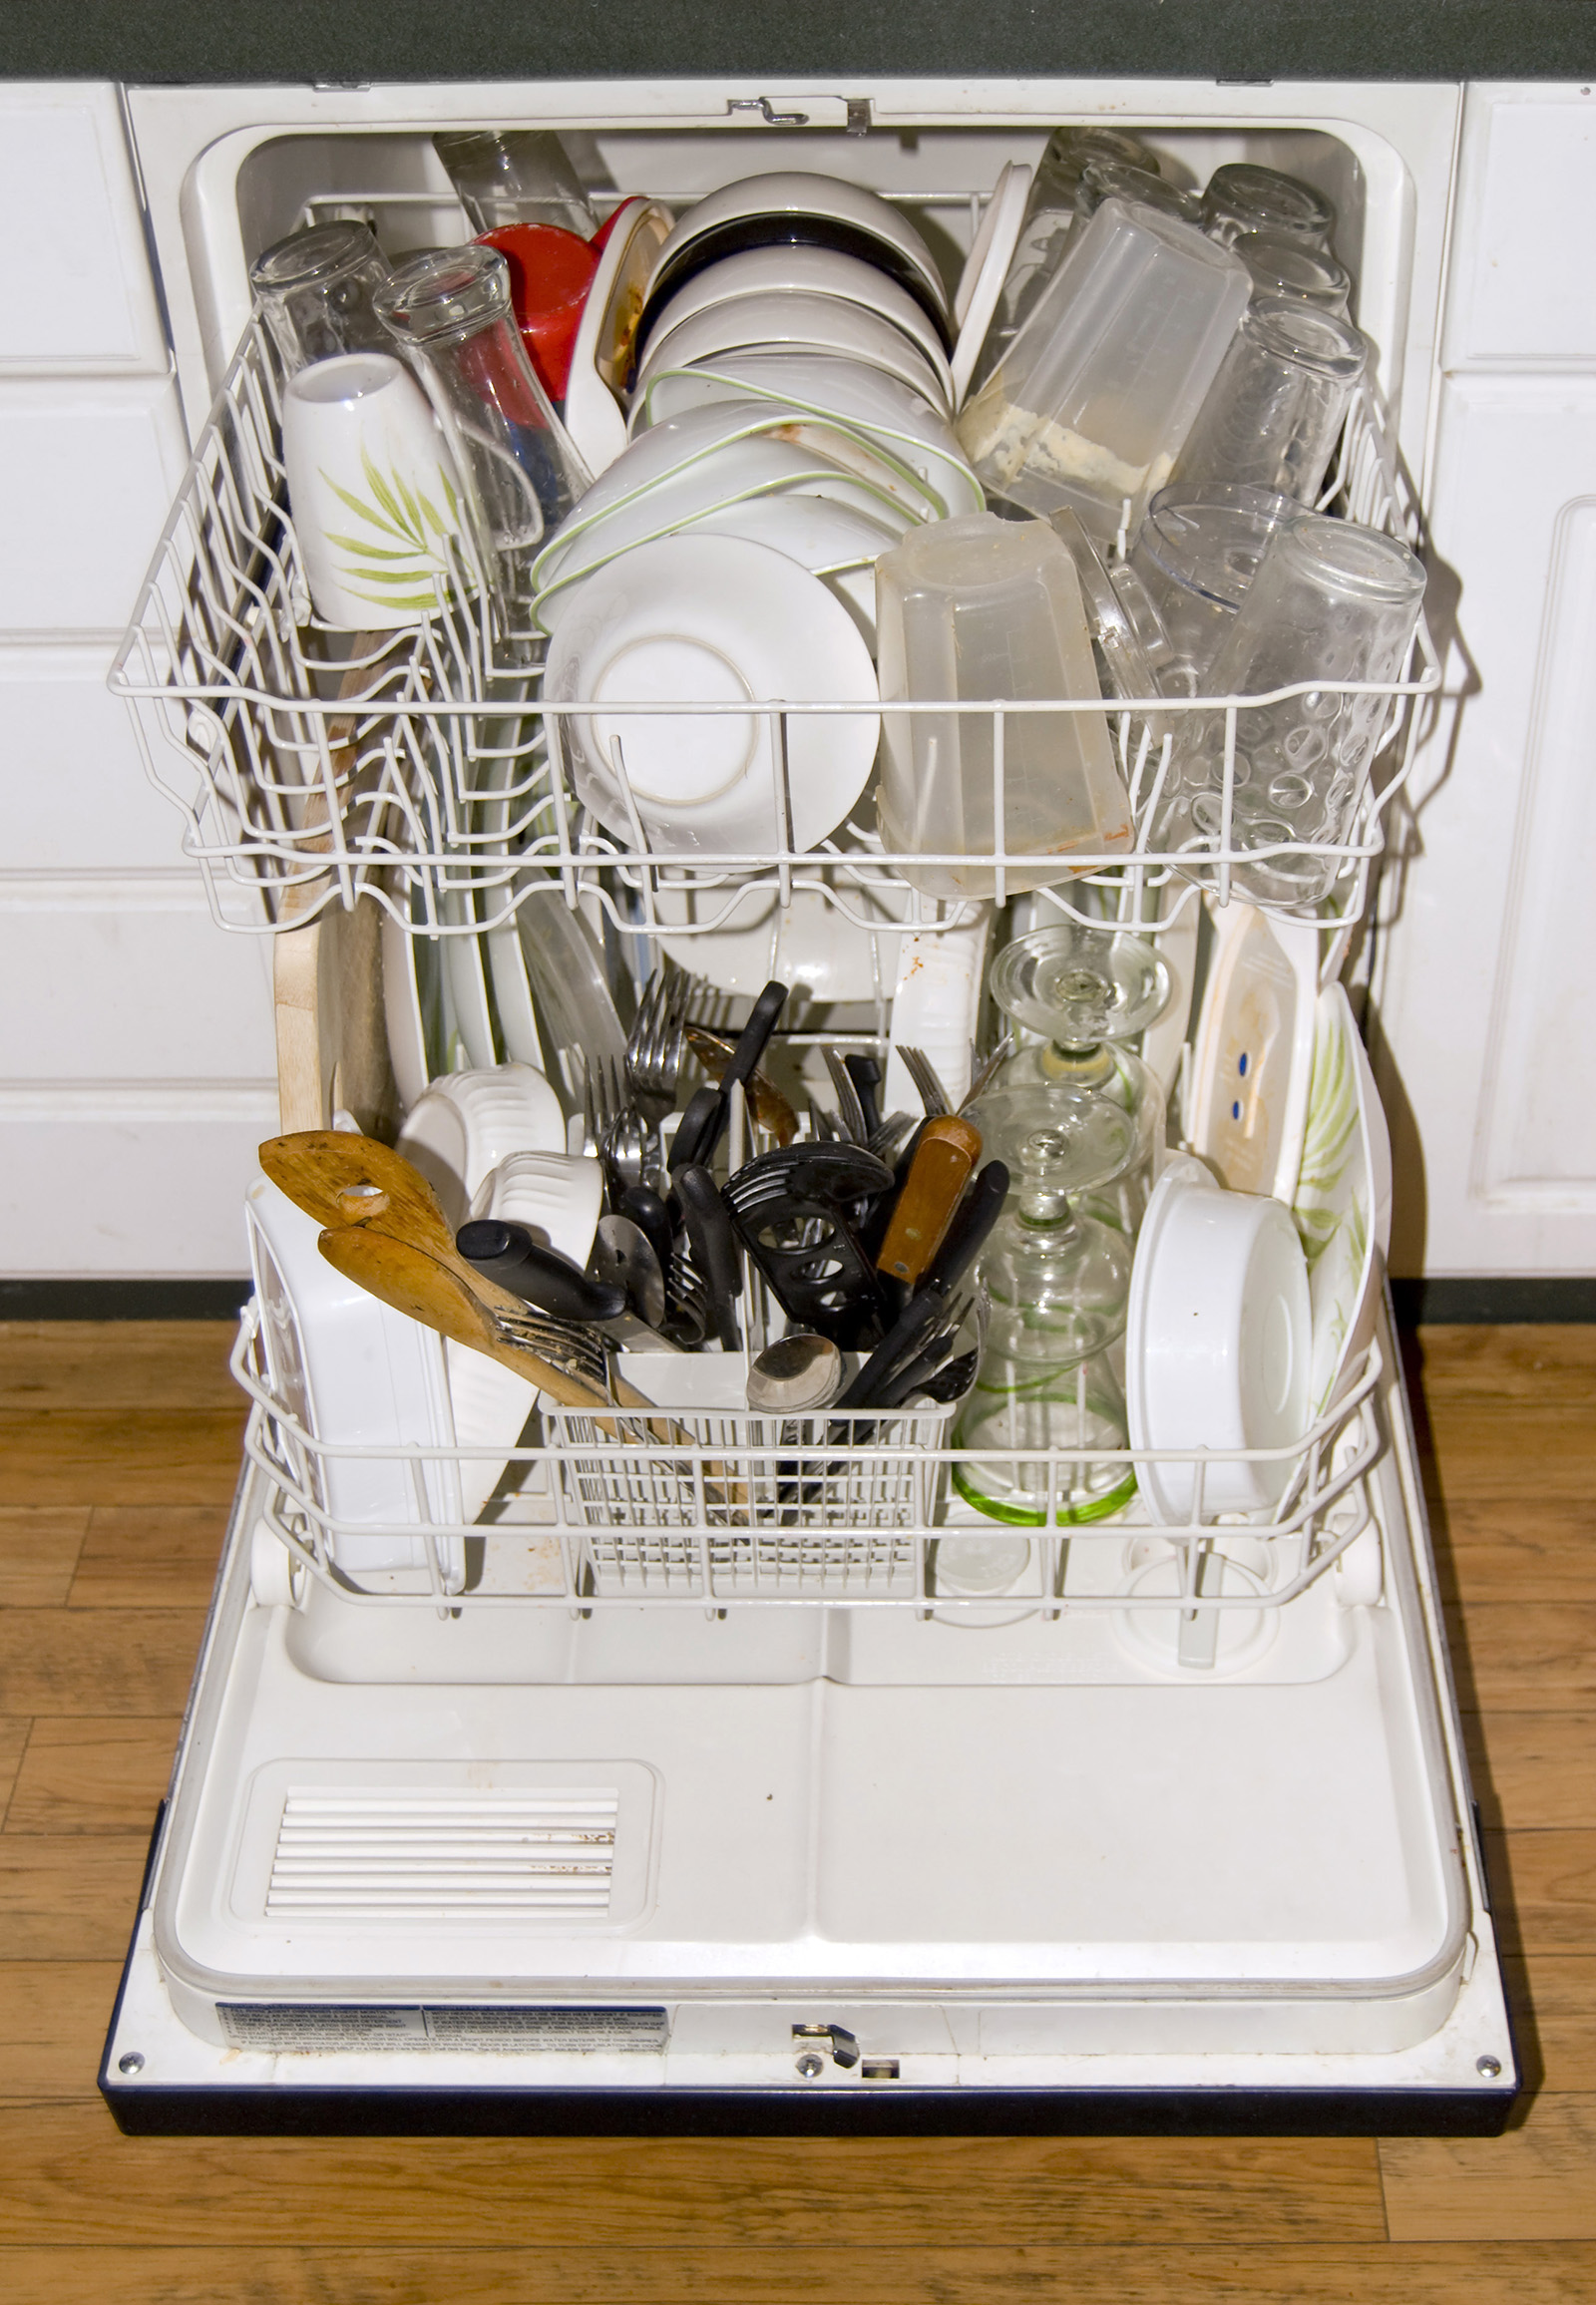 Tips for Caring for Your Dishwasher